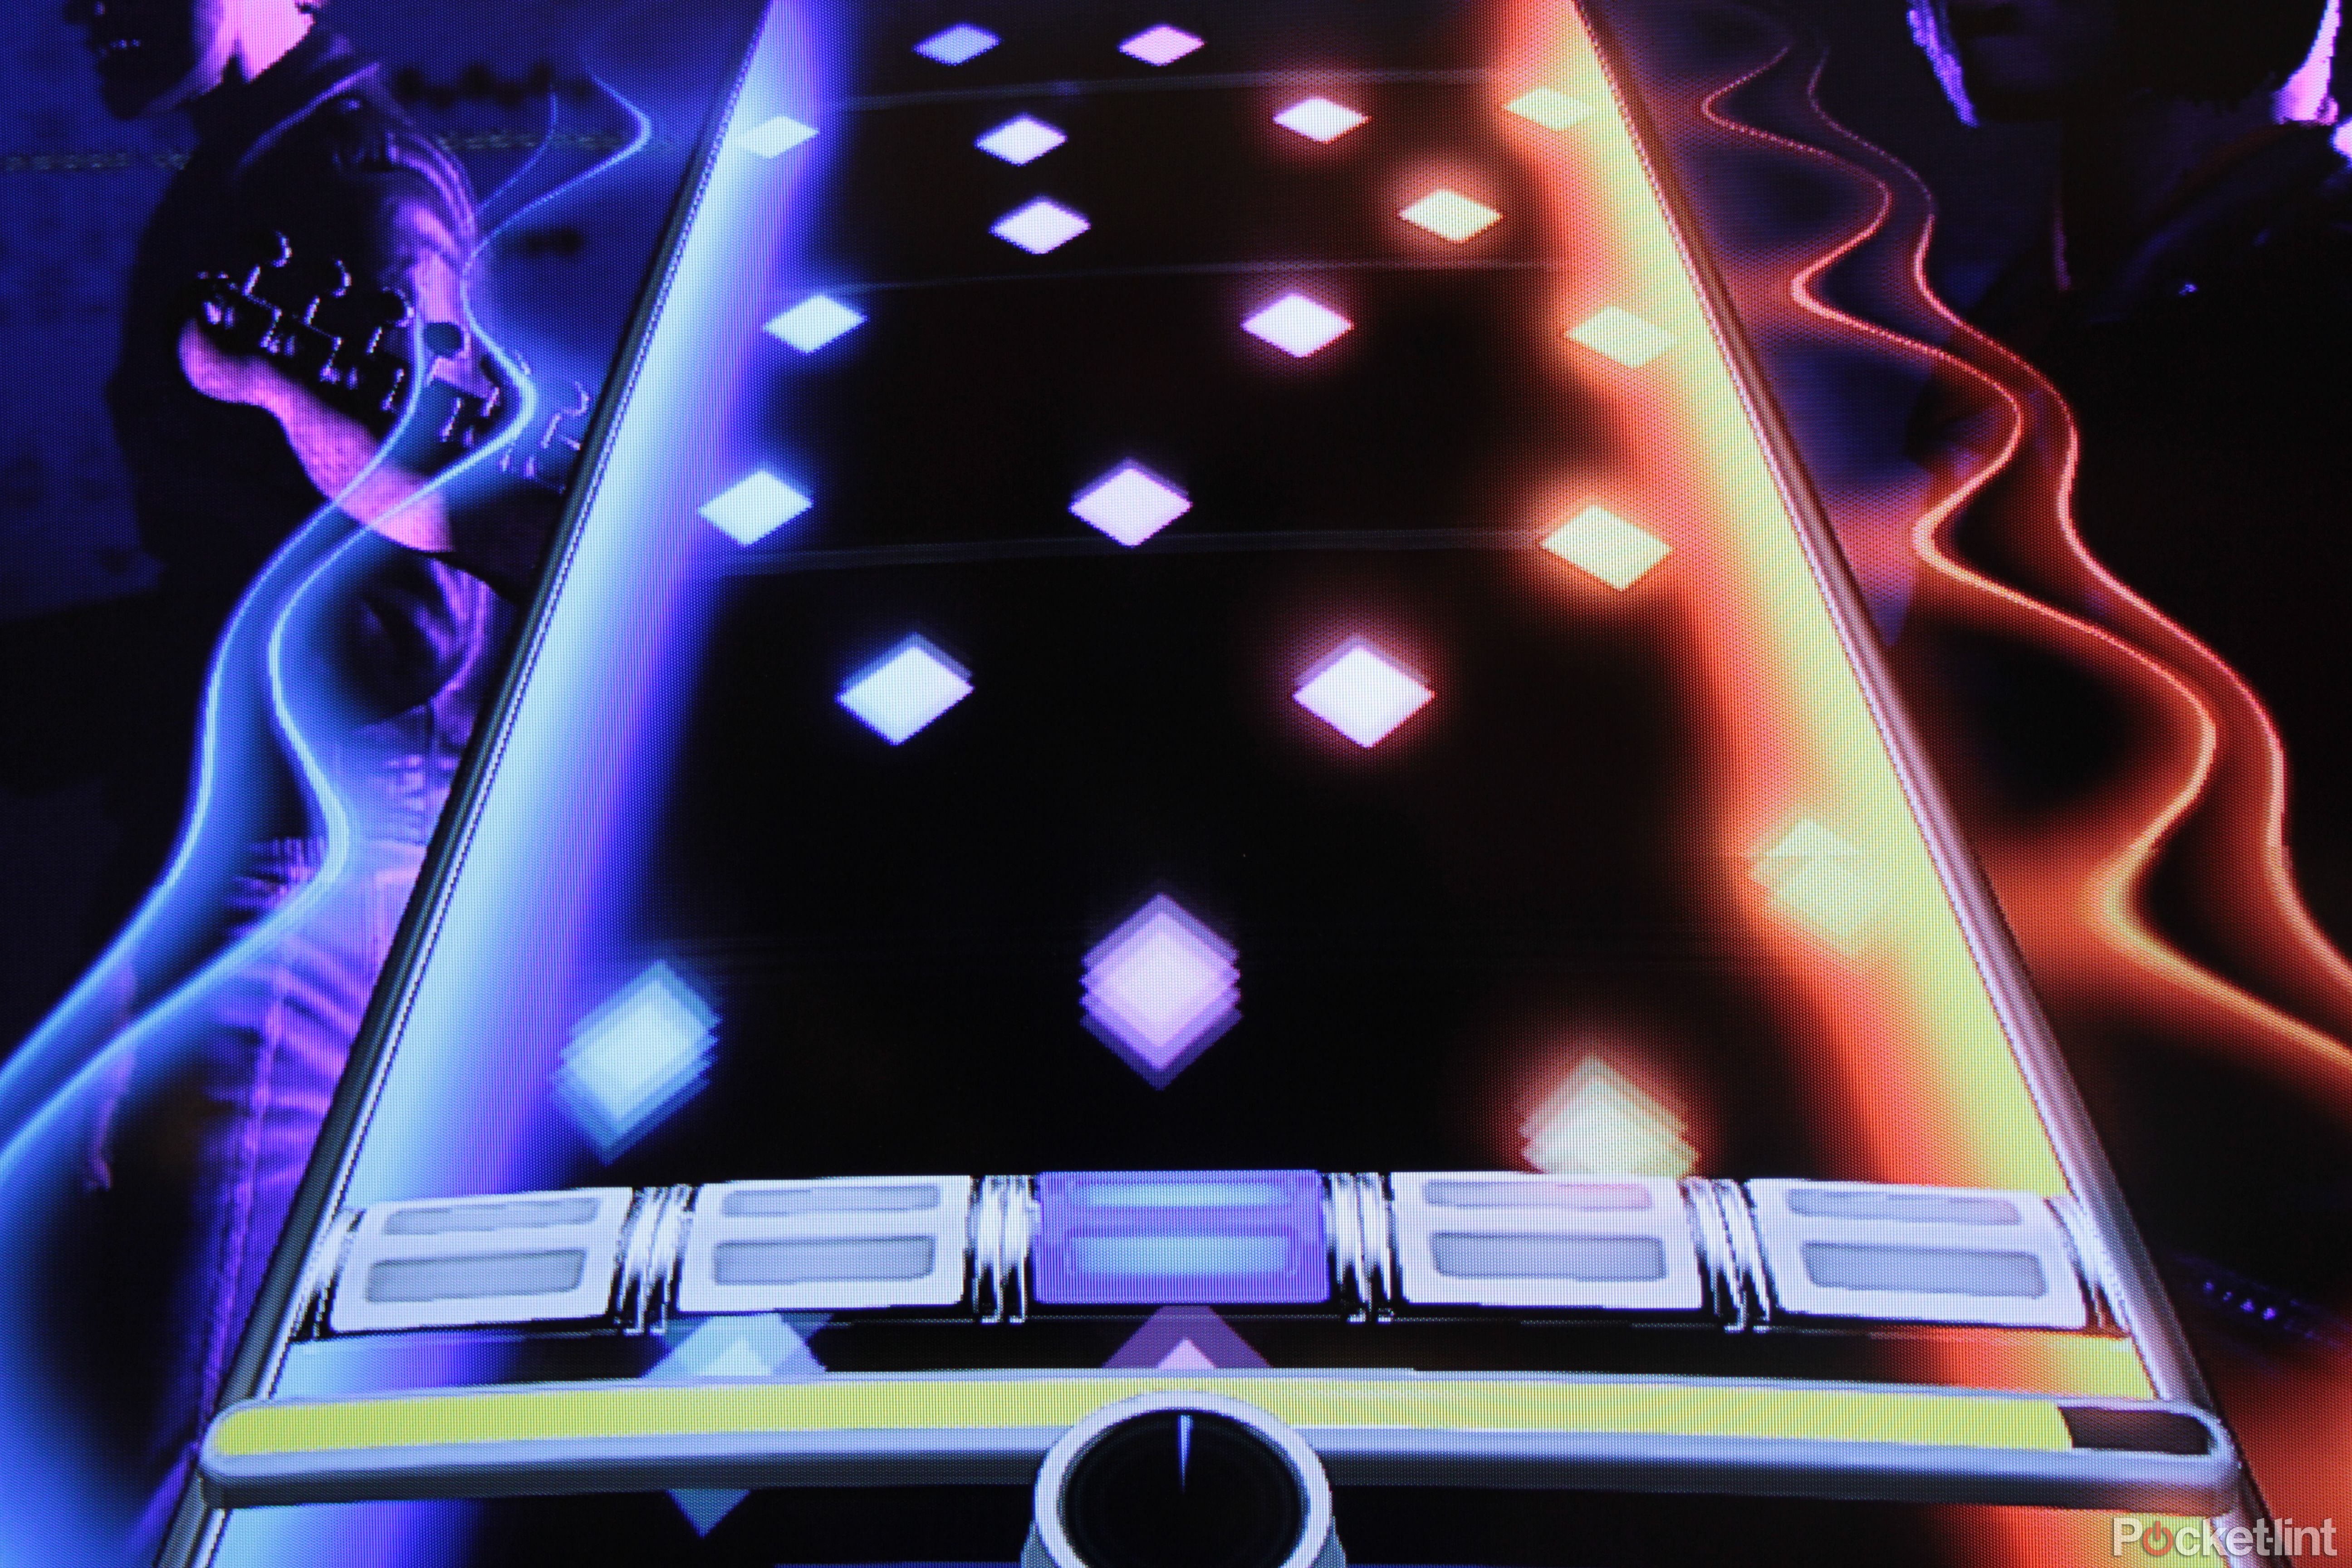 rock band 4 preview freestyle guitar solos and the new mad catz controllers hands on image 49